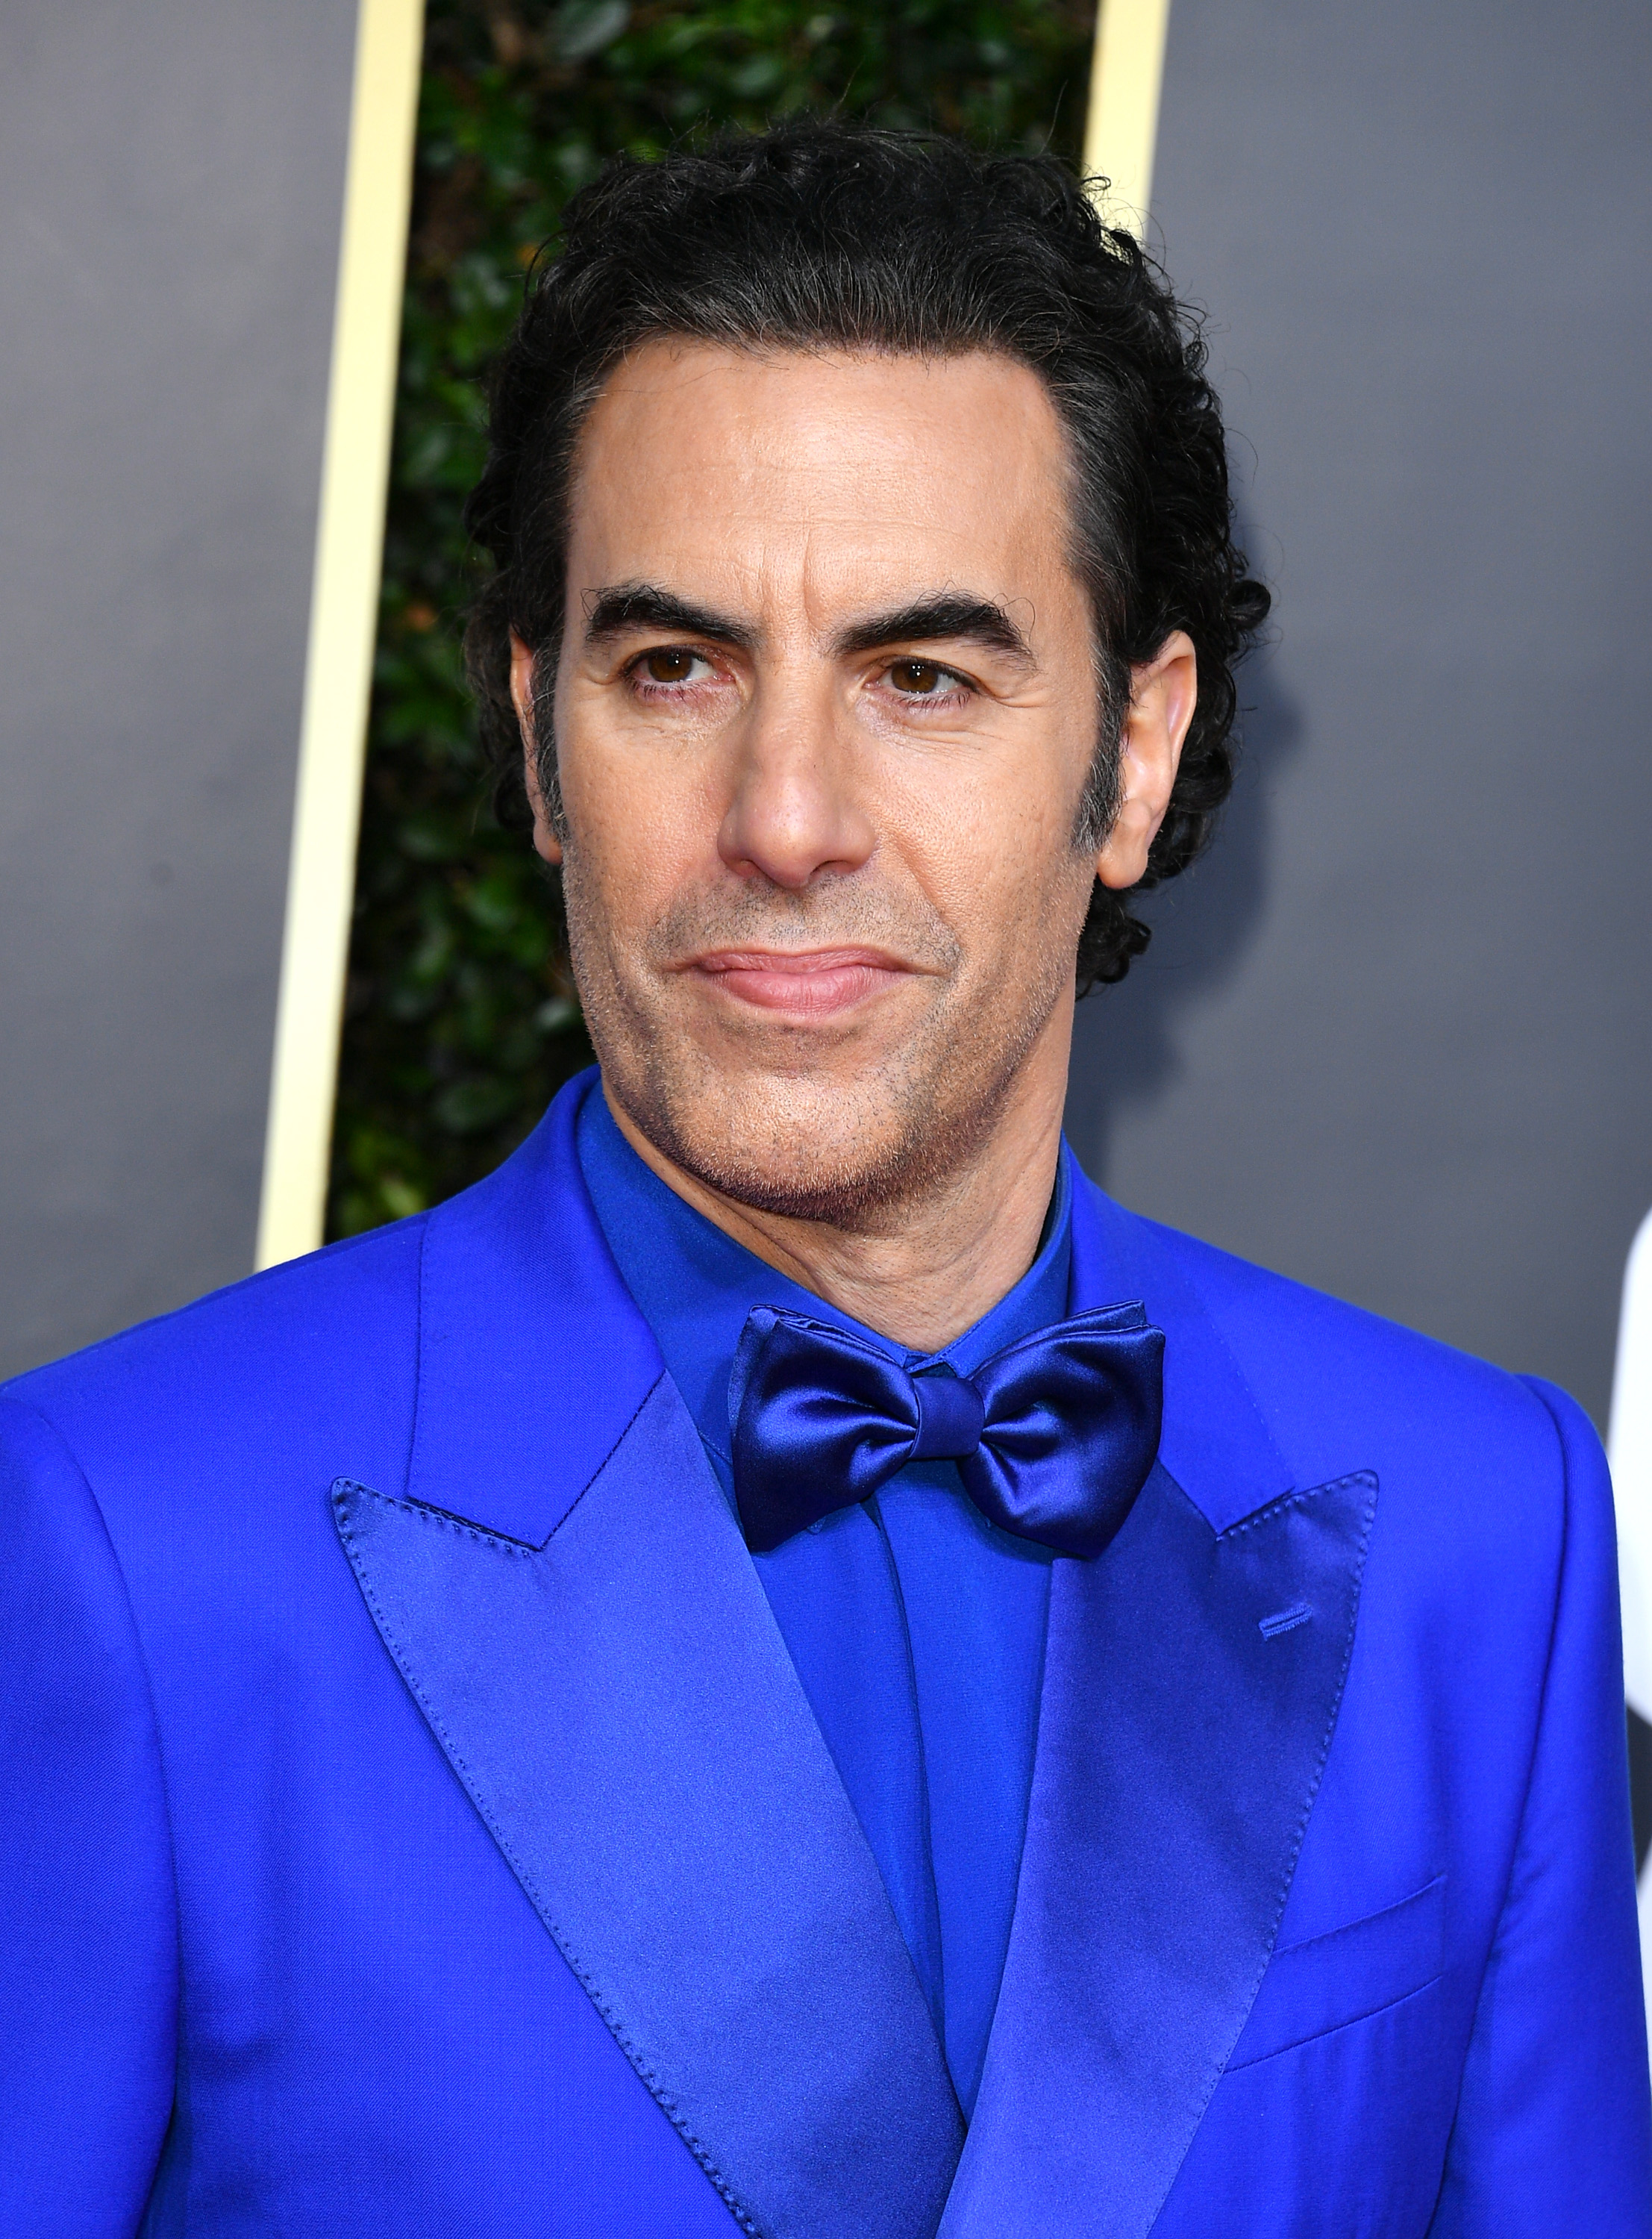 Sacha in a blue suit with a bow tie at an event